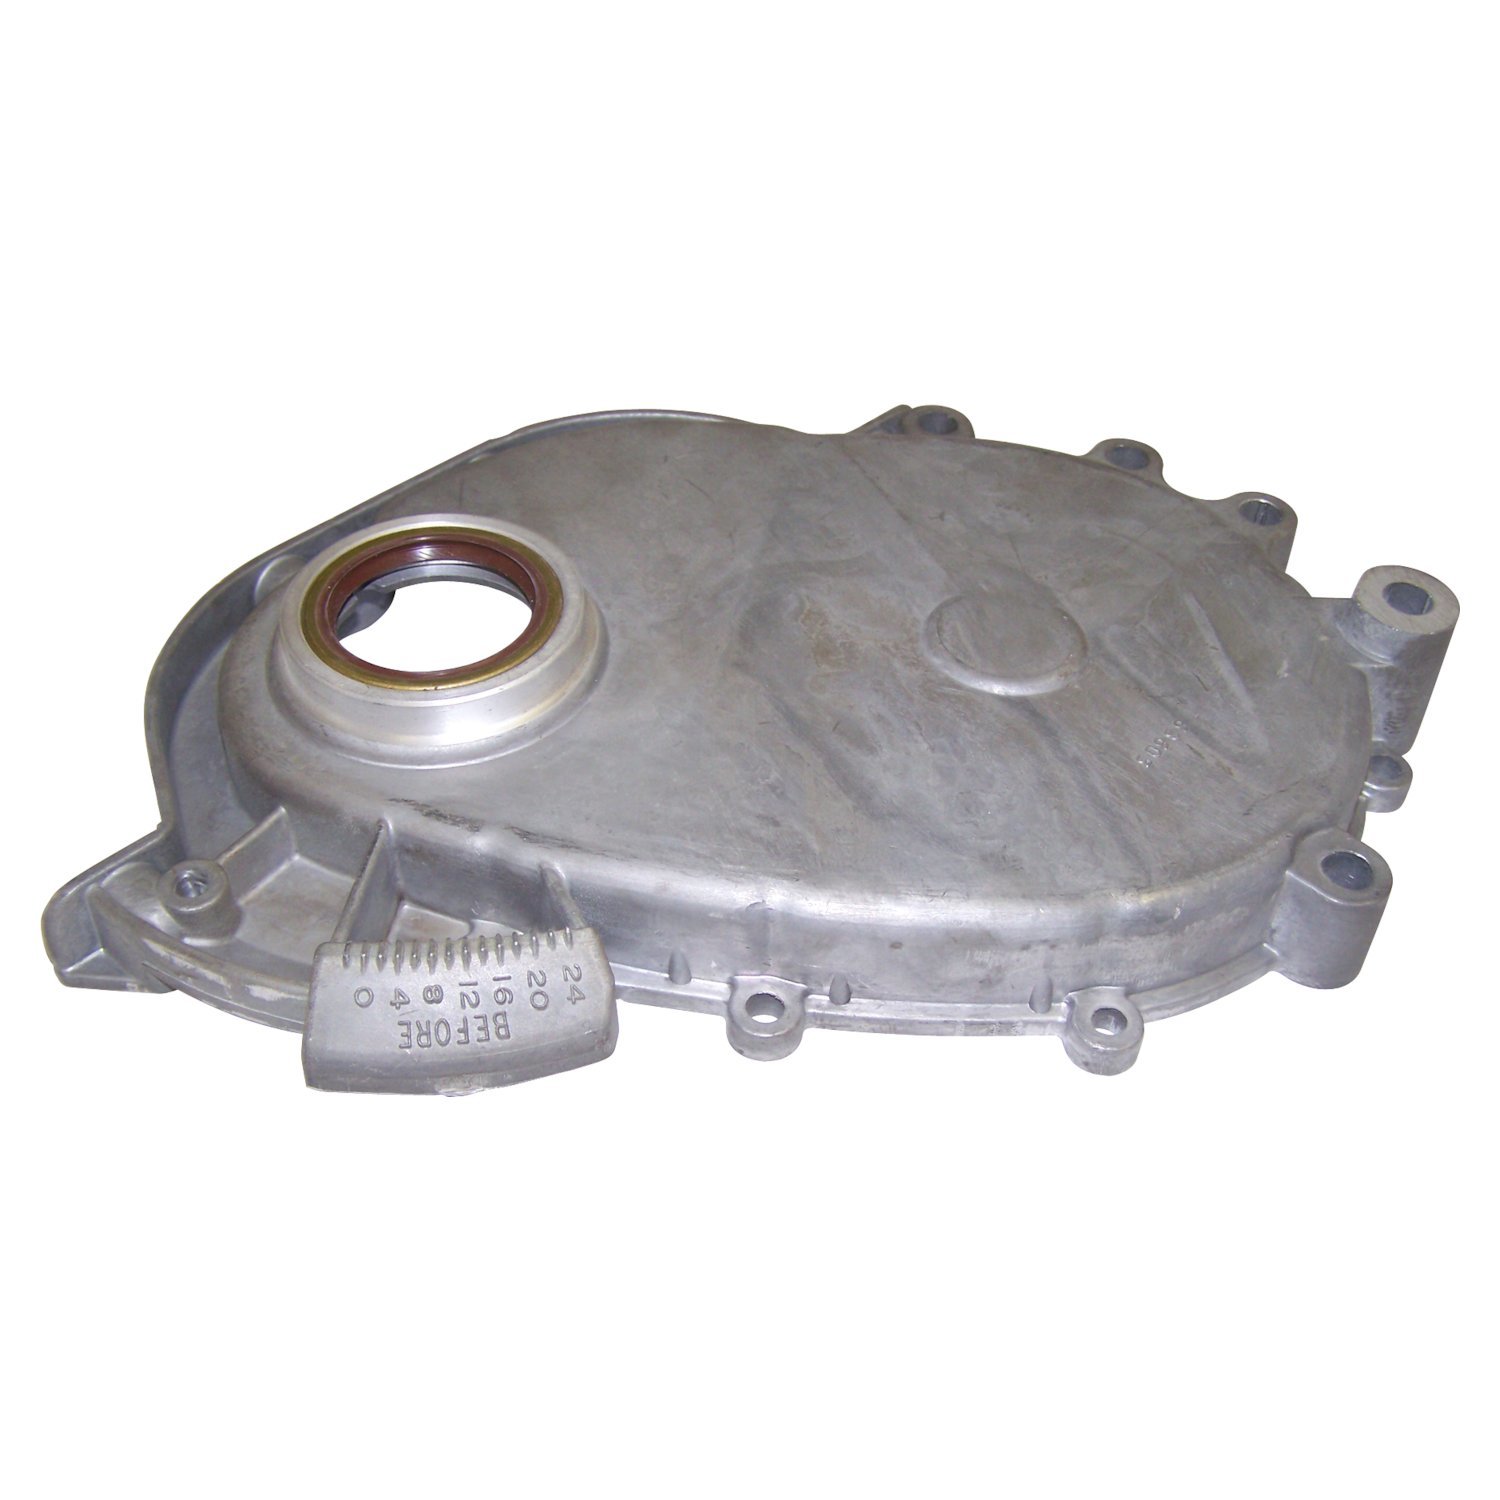 Timing Cover, Unpainted, Metal, Rubber